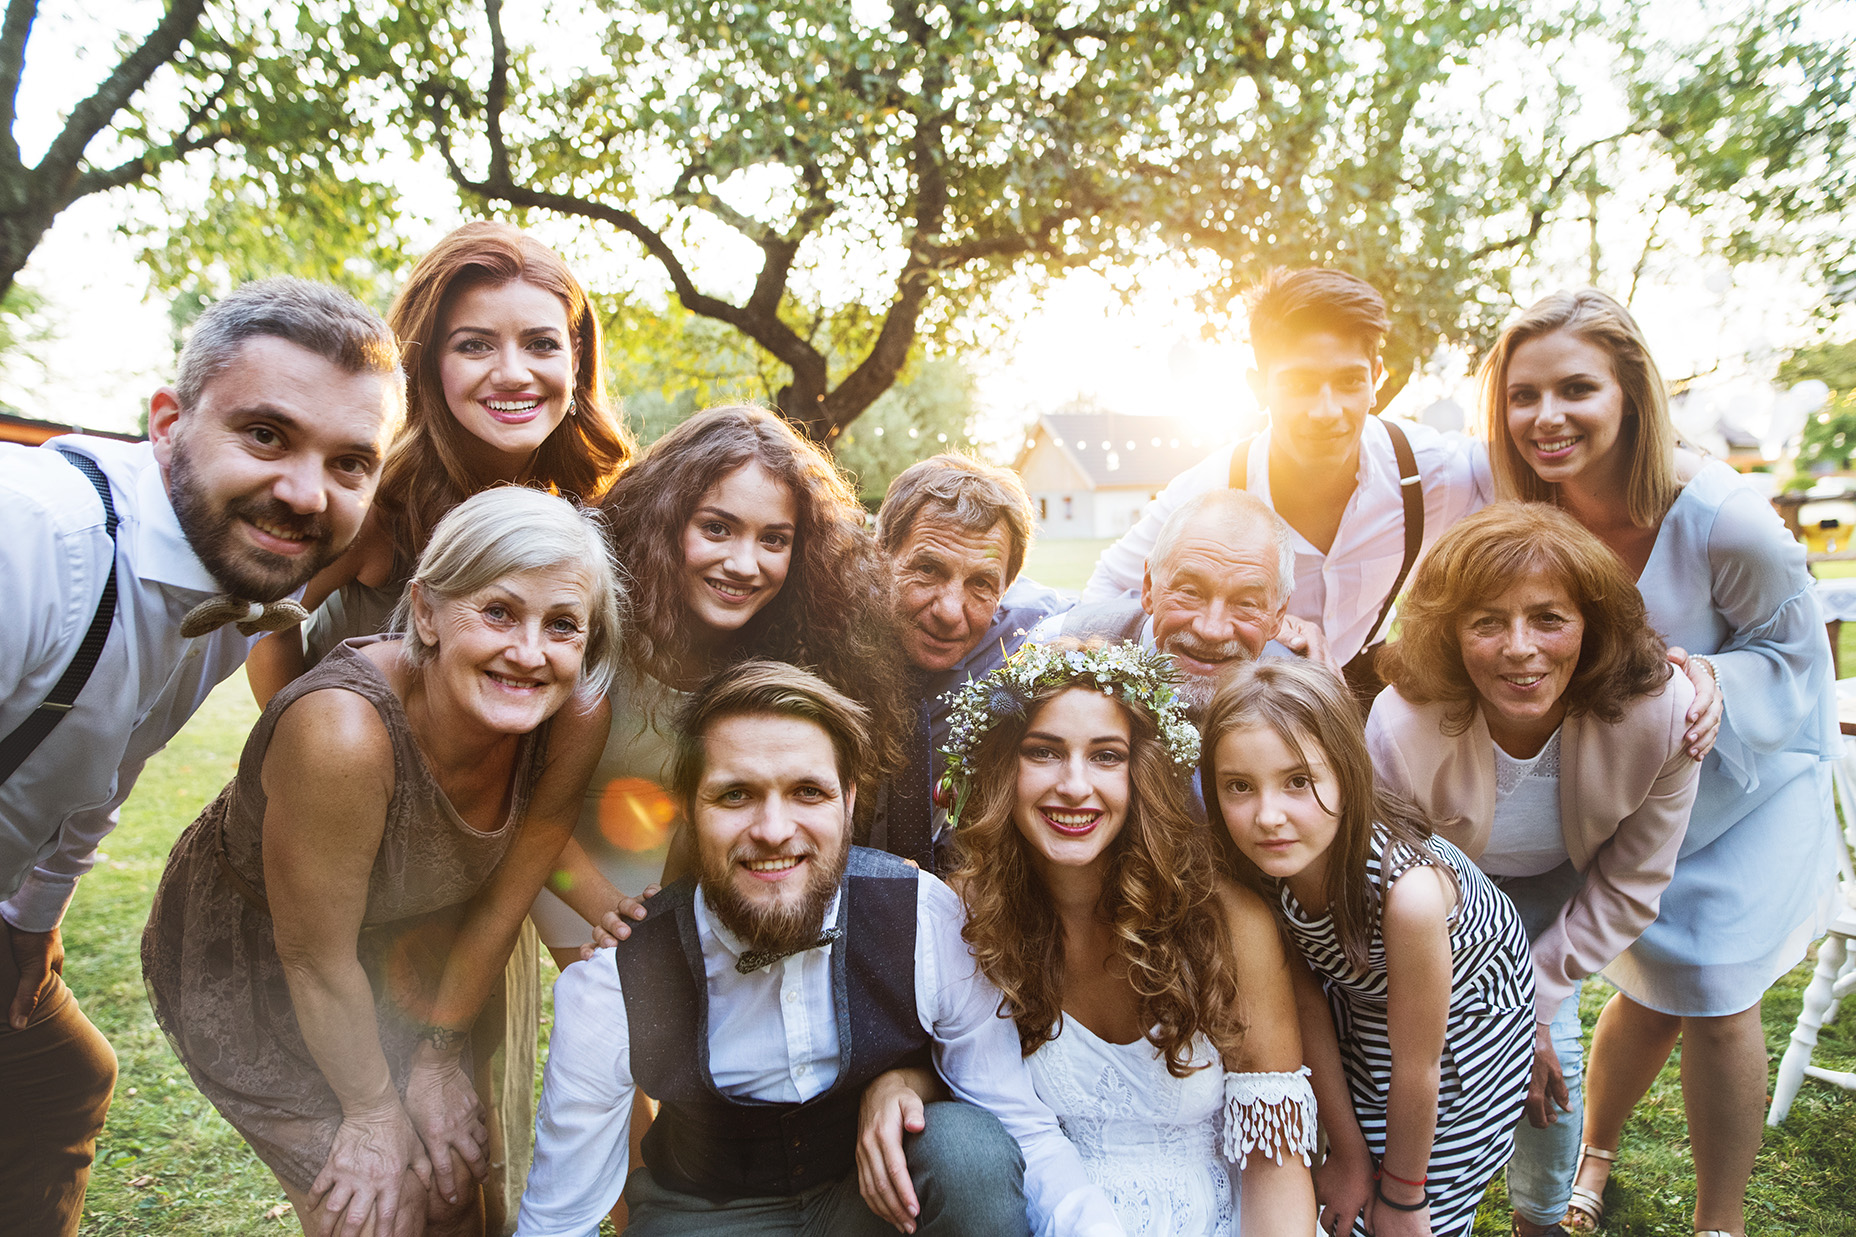 Outdoor family photo at wedding